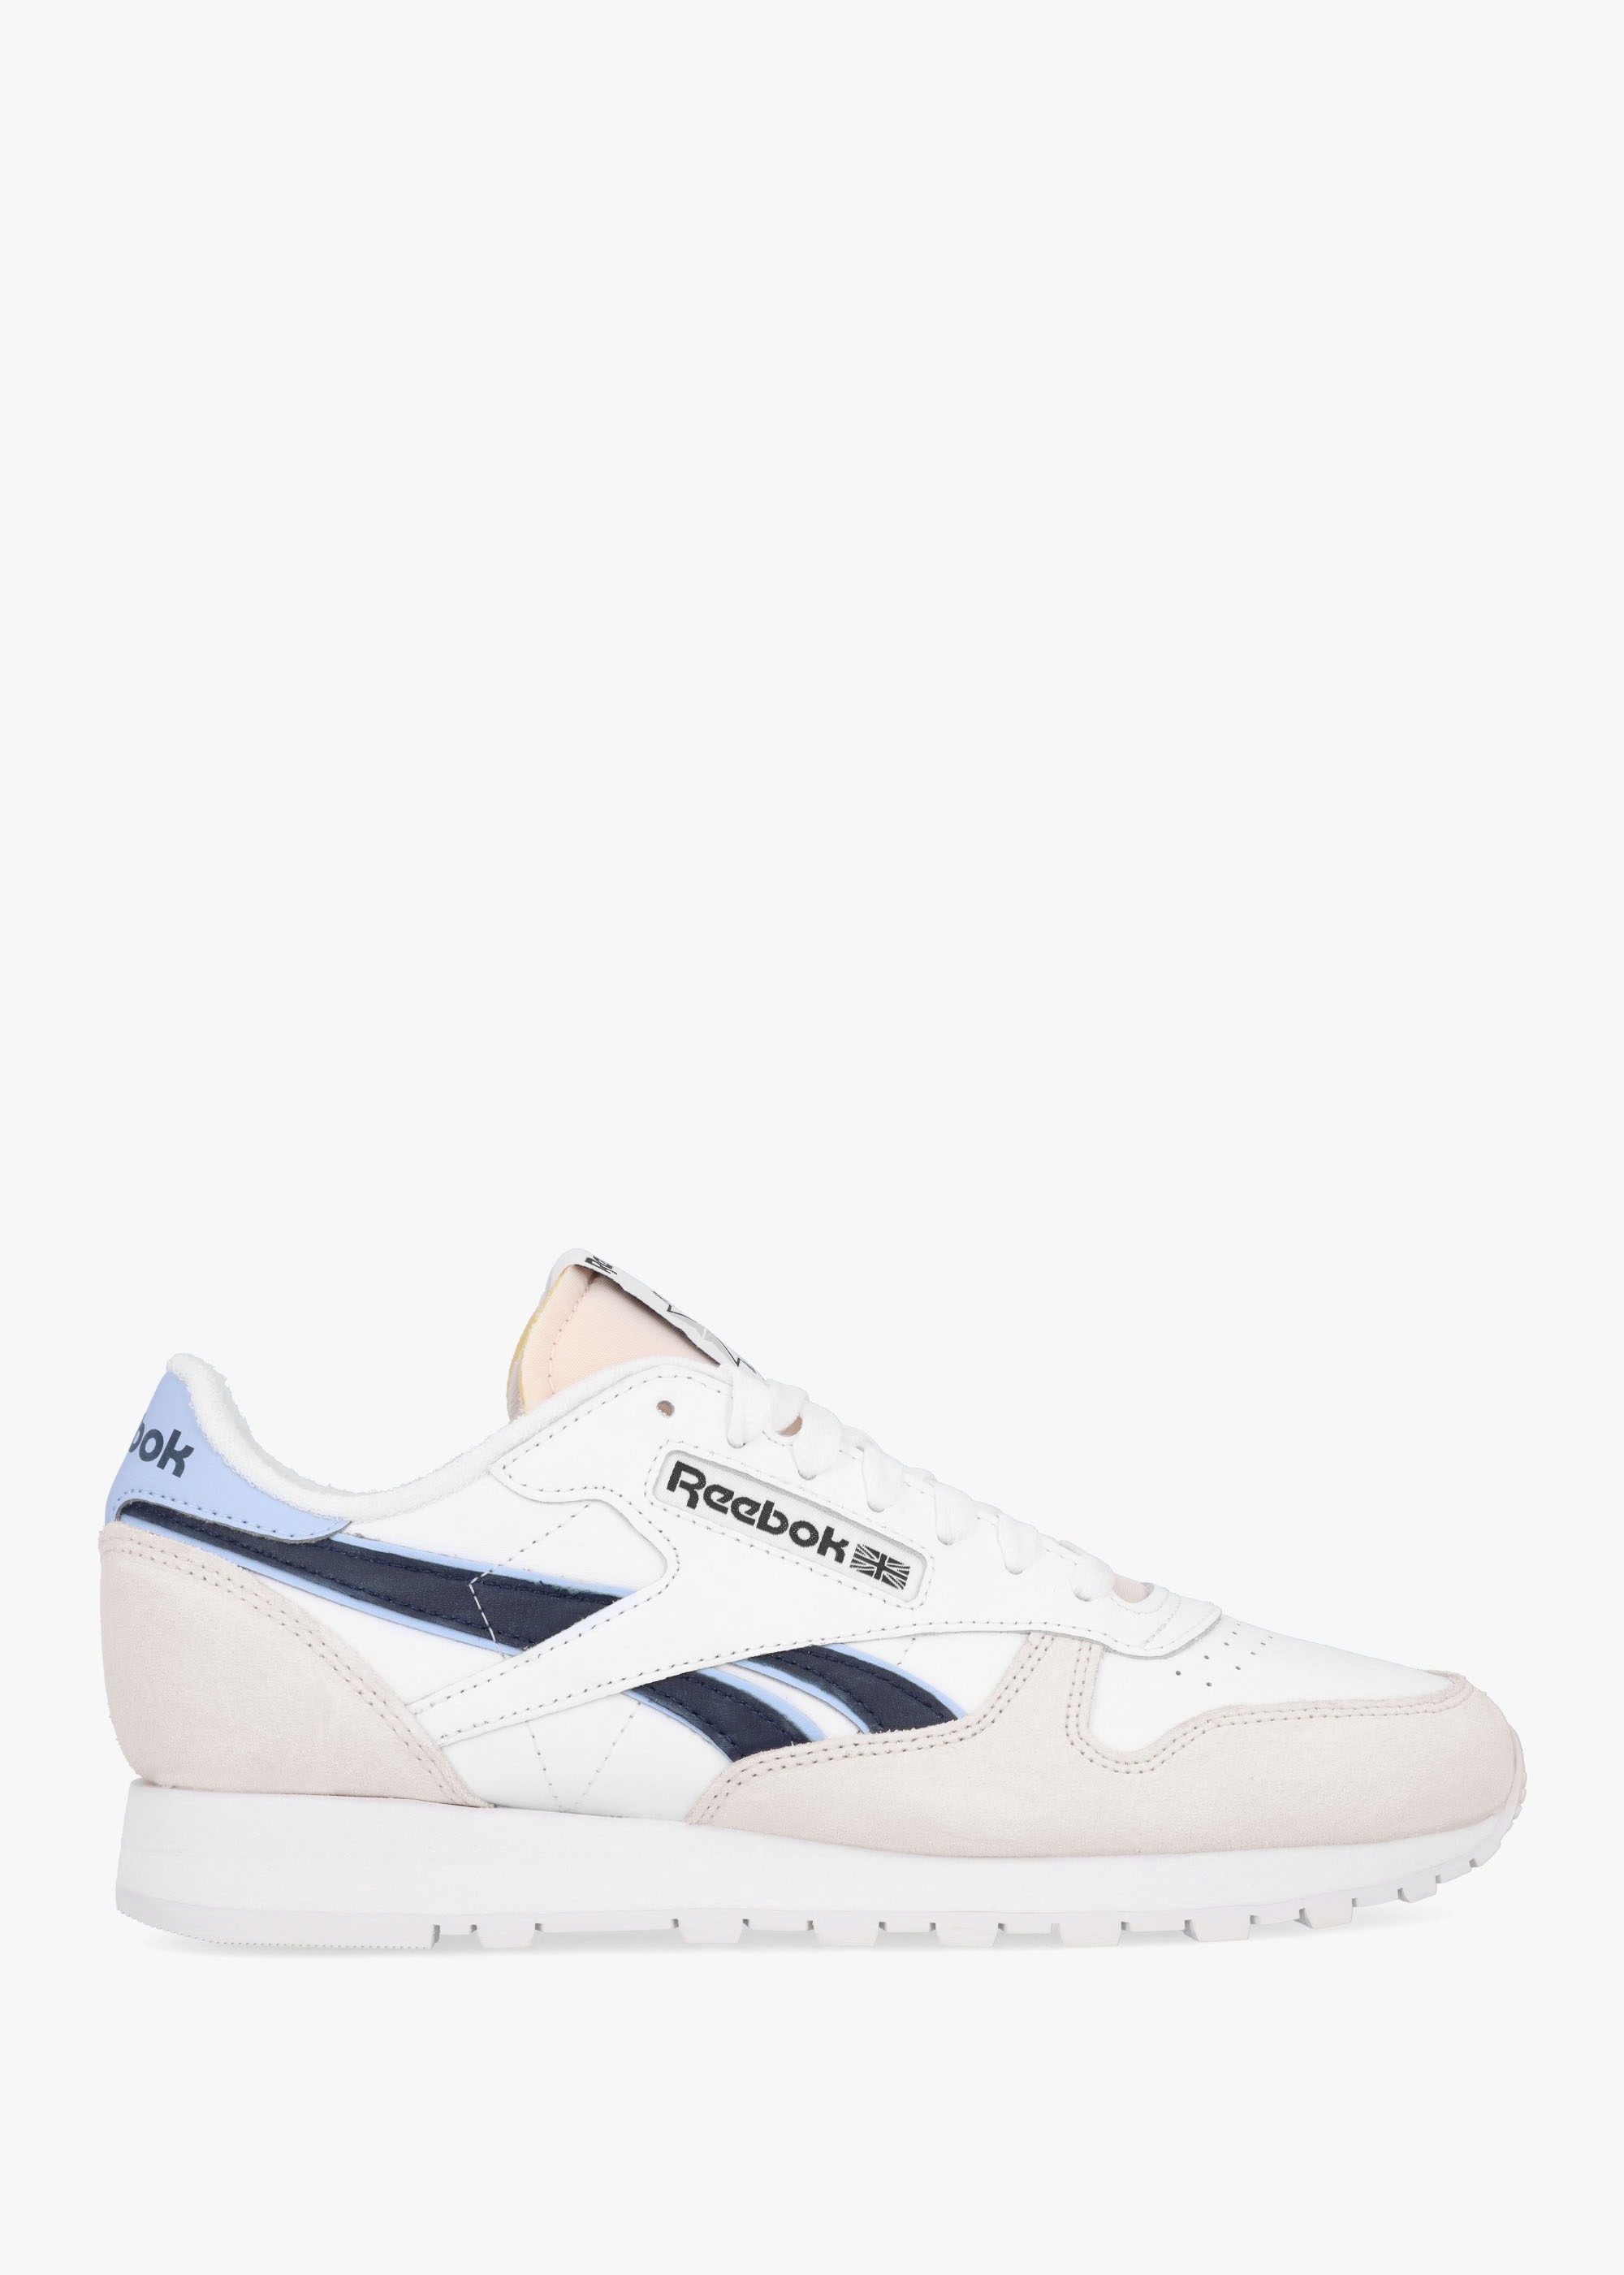 Reebok  Mens Classic Leather Trainers In Cloud White/Pure Grey/Pale Blue